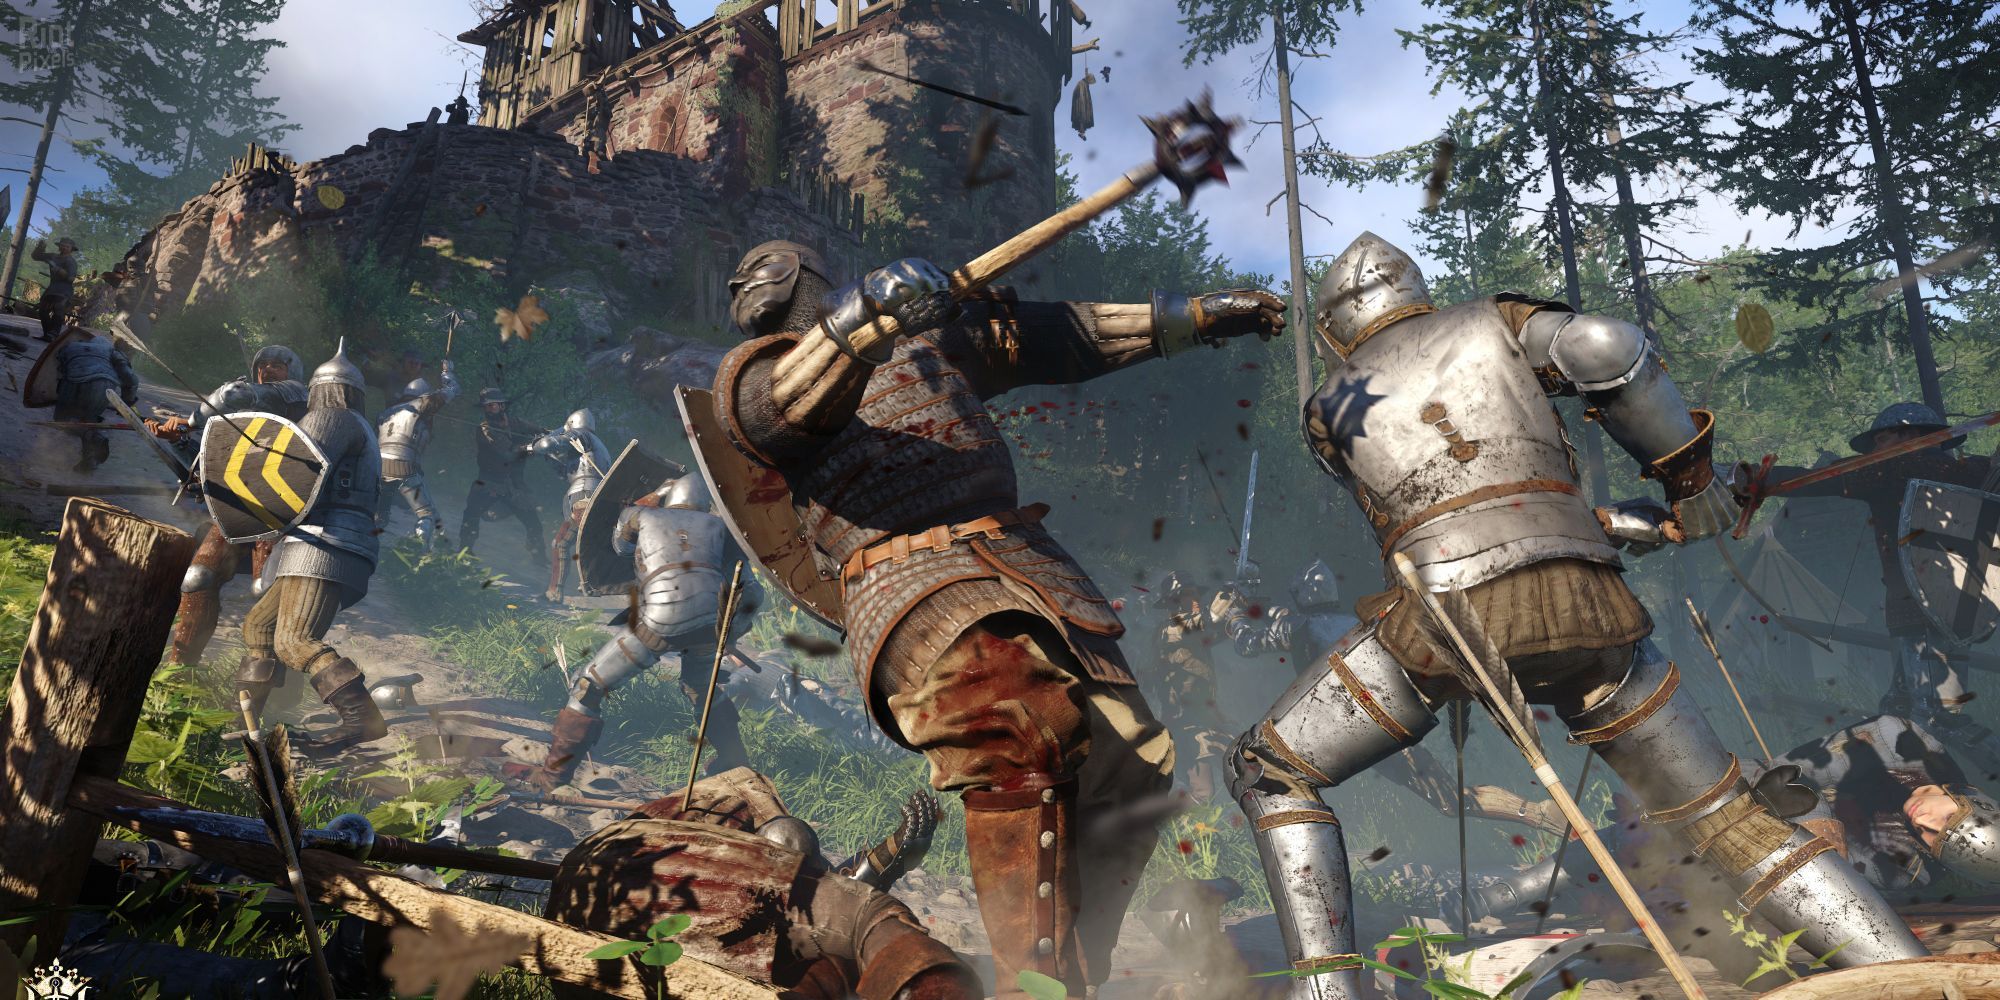 image from the game Kingdom Come Deliverance showing a massive medieval battle taking place